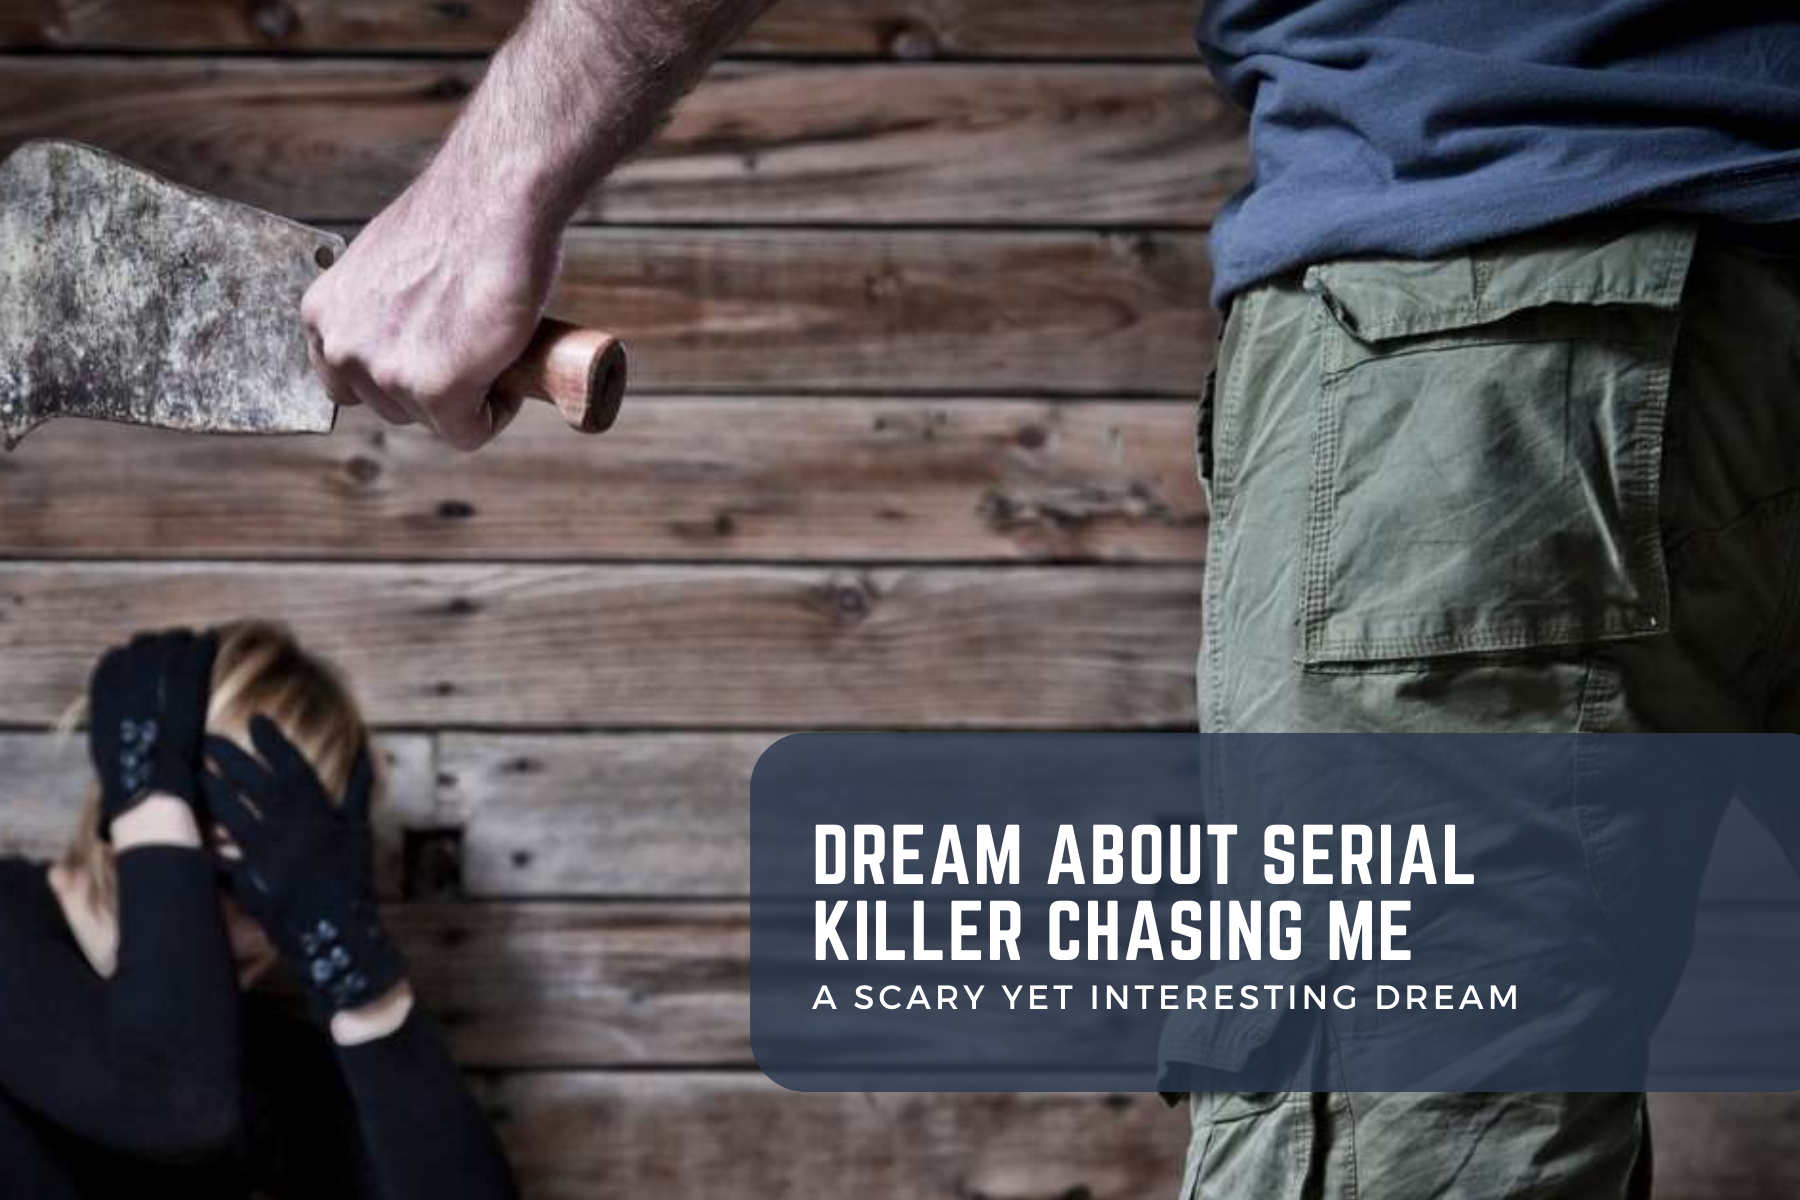 Dream About Serial Killer Chasing Me - A Scary Yet Interesting Dream